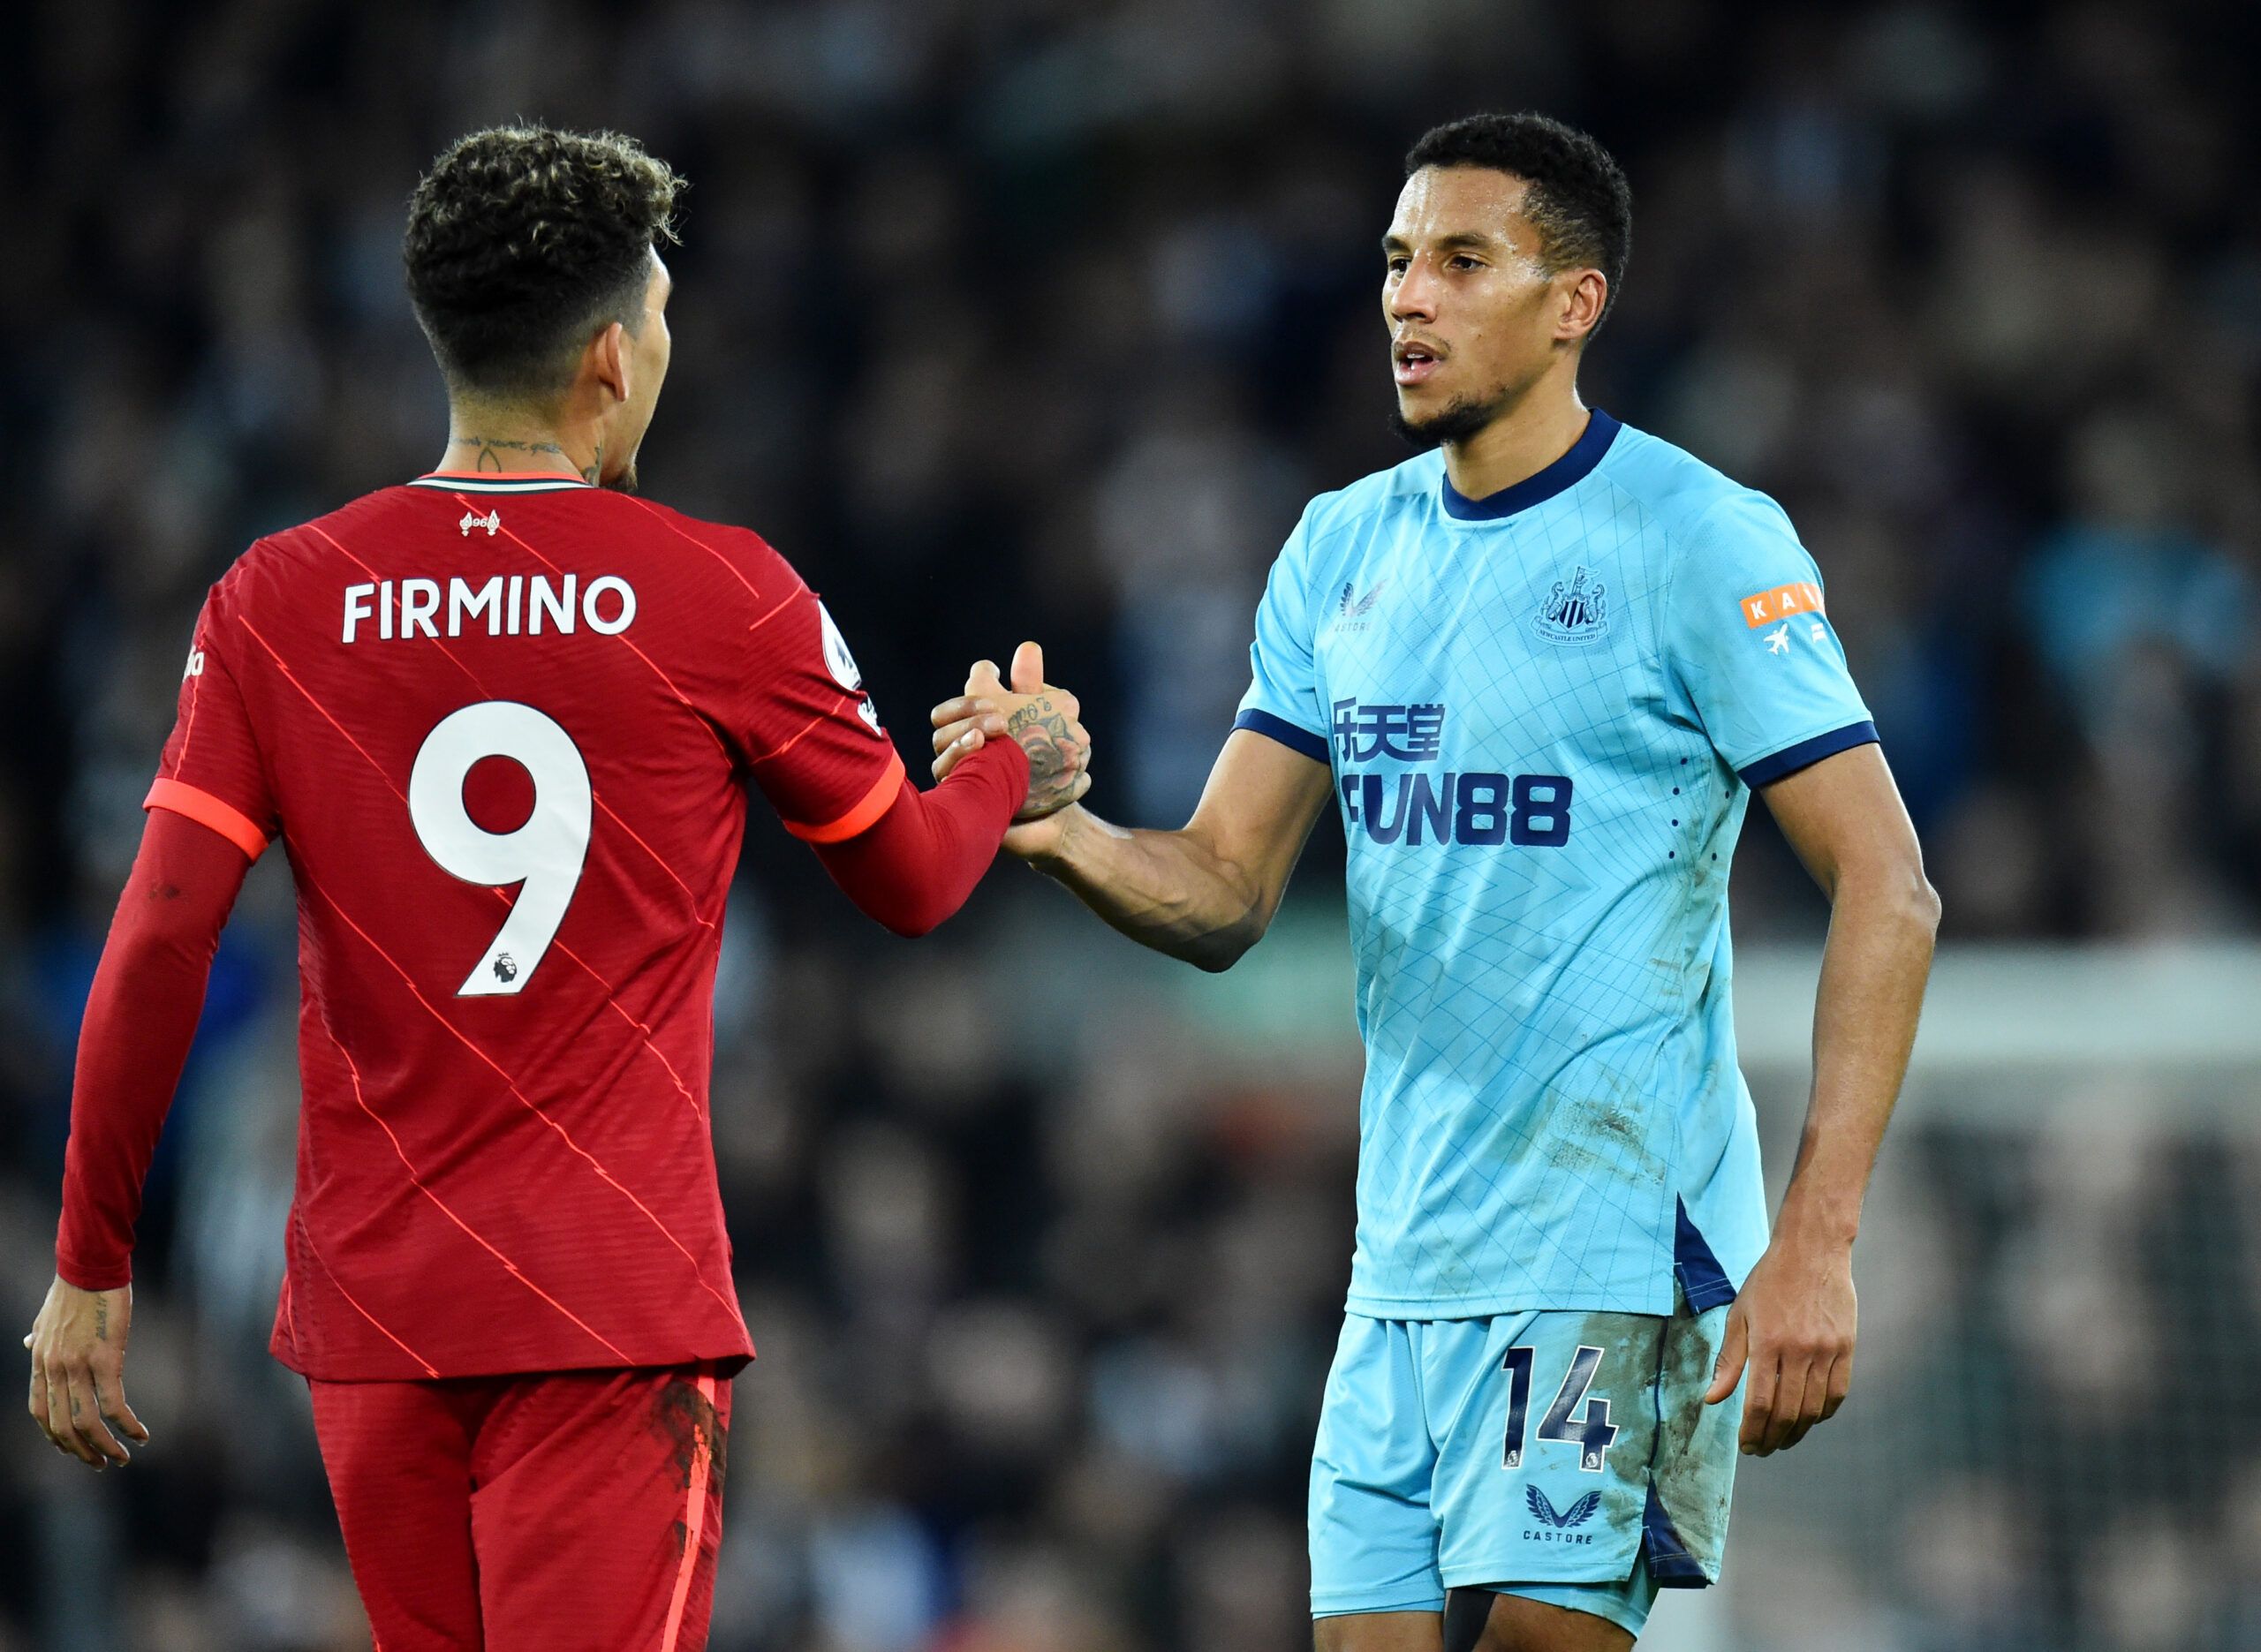 Soccer Football - Premier League - Liverpool v Newcastle United - Anfield, Liverpool, Britain - December 16, 2021 Liverpool's Roberto Firmino shakes hands with Newcastle United's Isaac Hayden after the match REUTERS/Peter Powell EDITORIAL USE ONLY. No use with unauthorized audio, video, data, fixture lists, club/league logos or 'live' services. Online in-match use limited to 75 images, no video emulation. No use in betting, games or single club /league/player publications.  Please contact your a